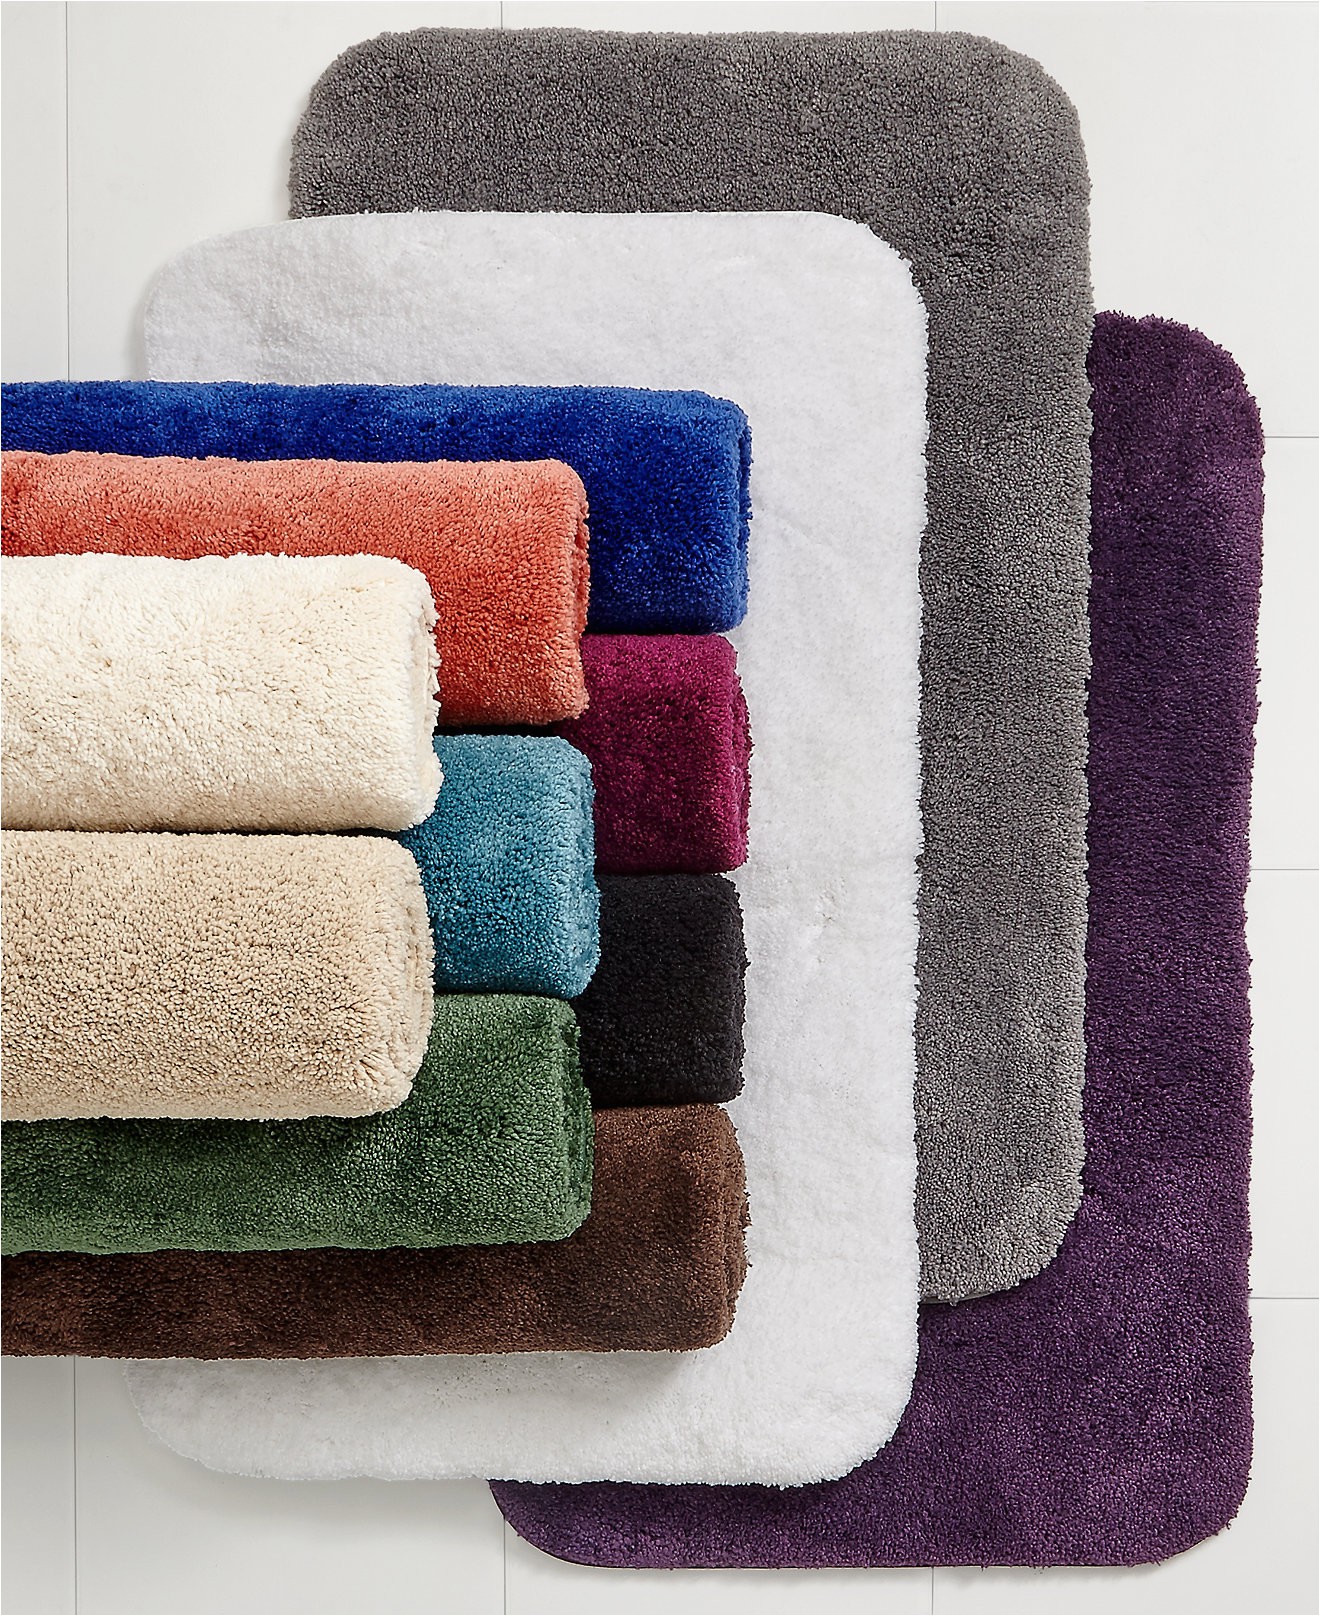 Bed Bath and Beyond Green Bathroom Rugs Bathroom Rug Sets Bed Bath and Beyond Image Of Bathroom